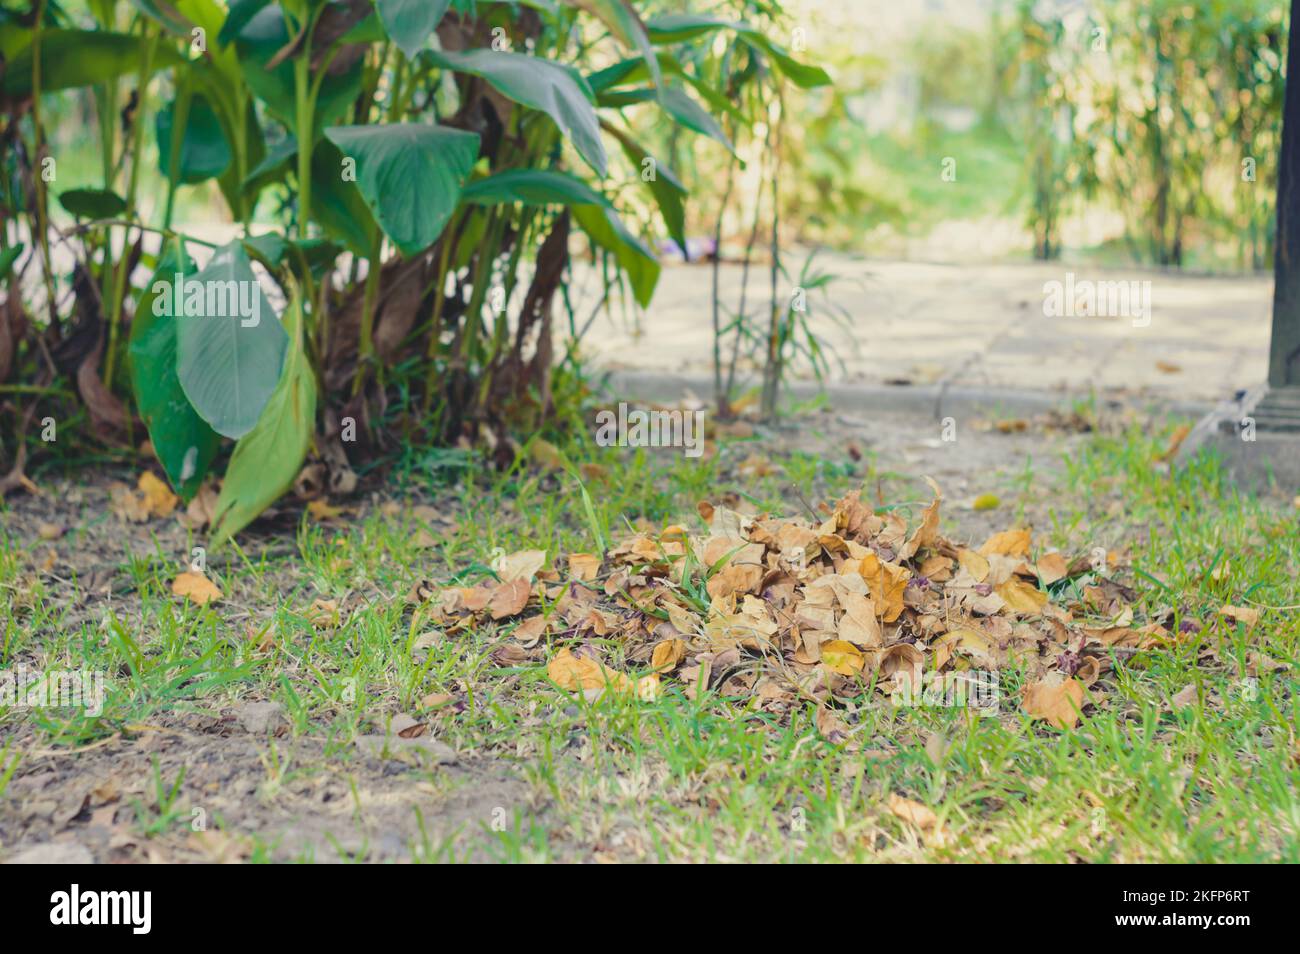 Compost Heap of Waste falling Leaves Picking Up after Clean and gathered in a garden park for Recycling. Natural Waste Management Recycled Material. Z Stock Photo